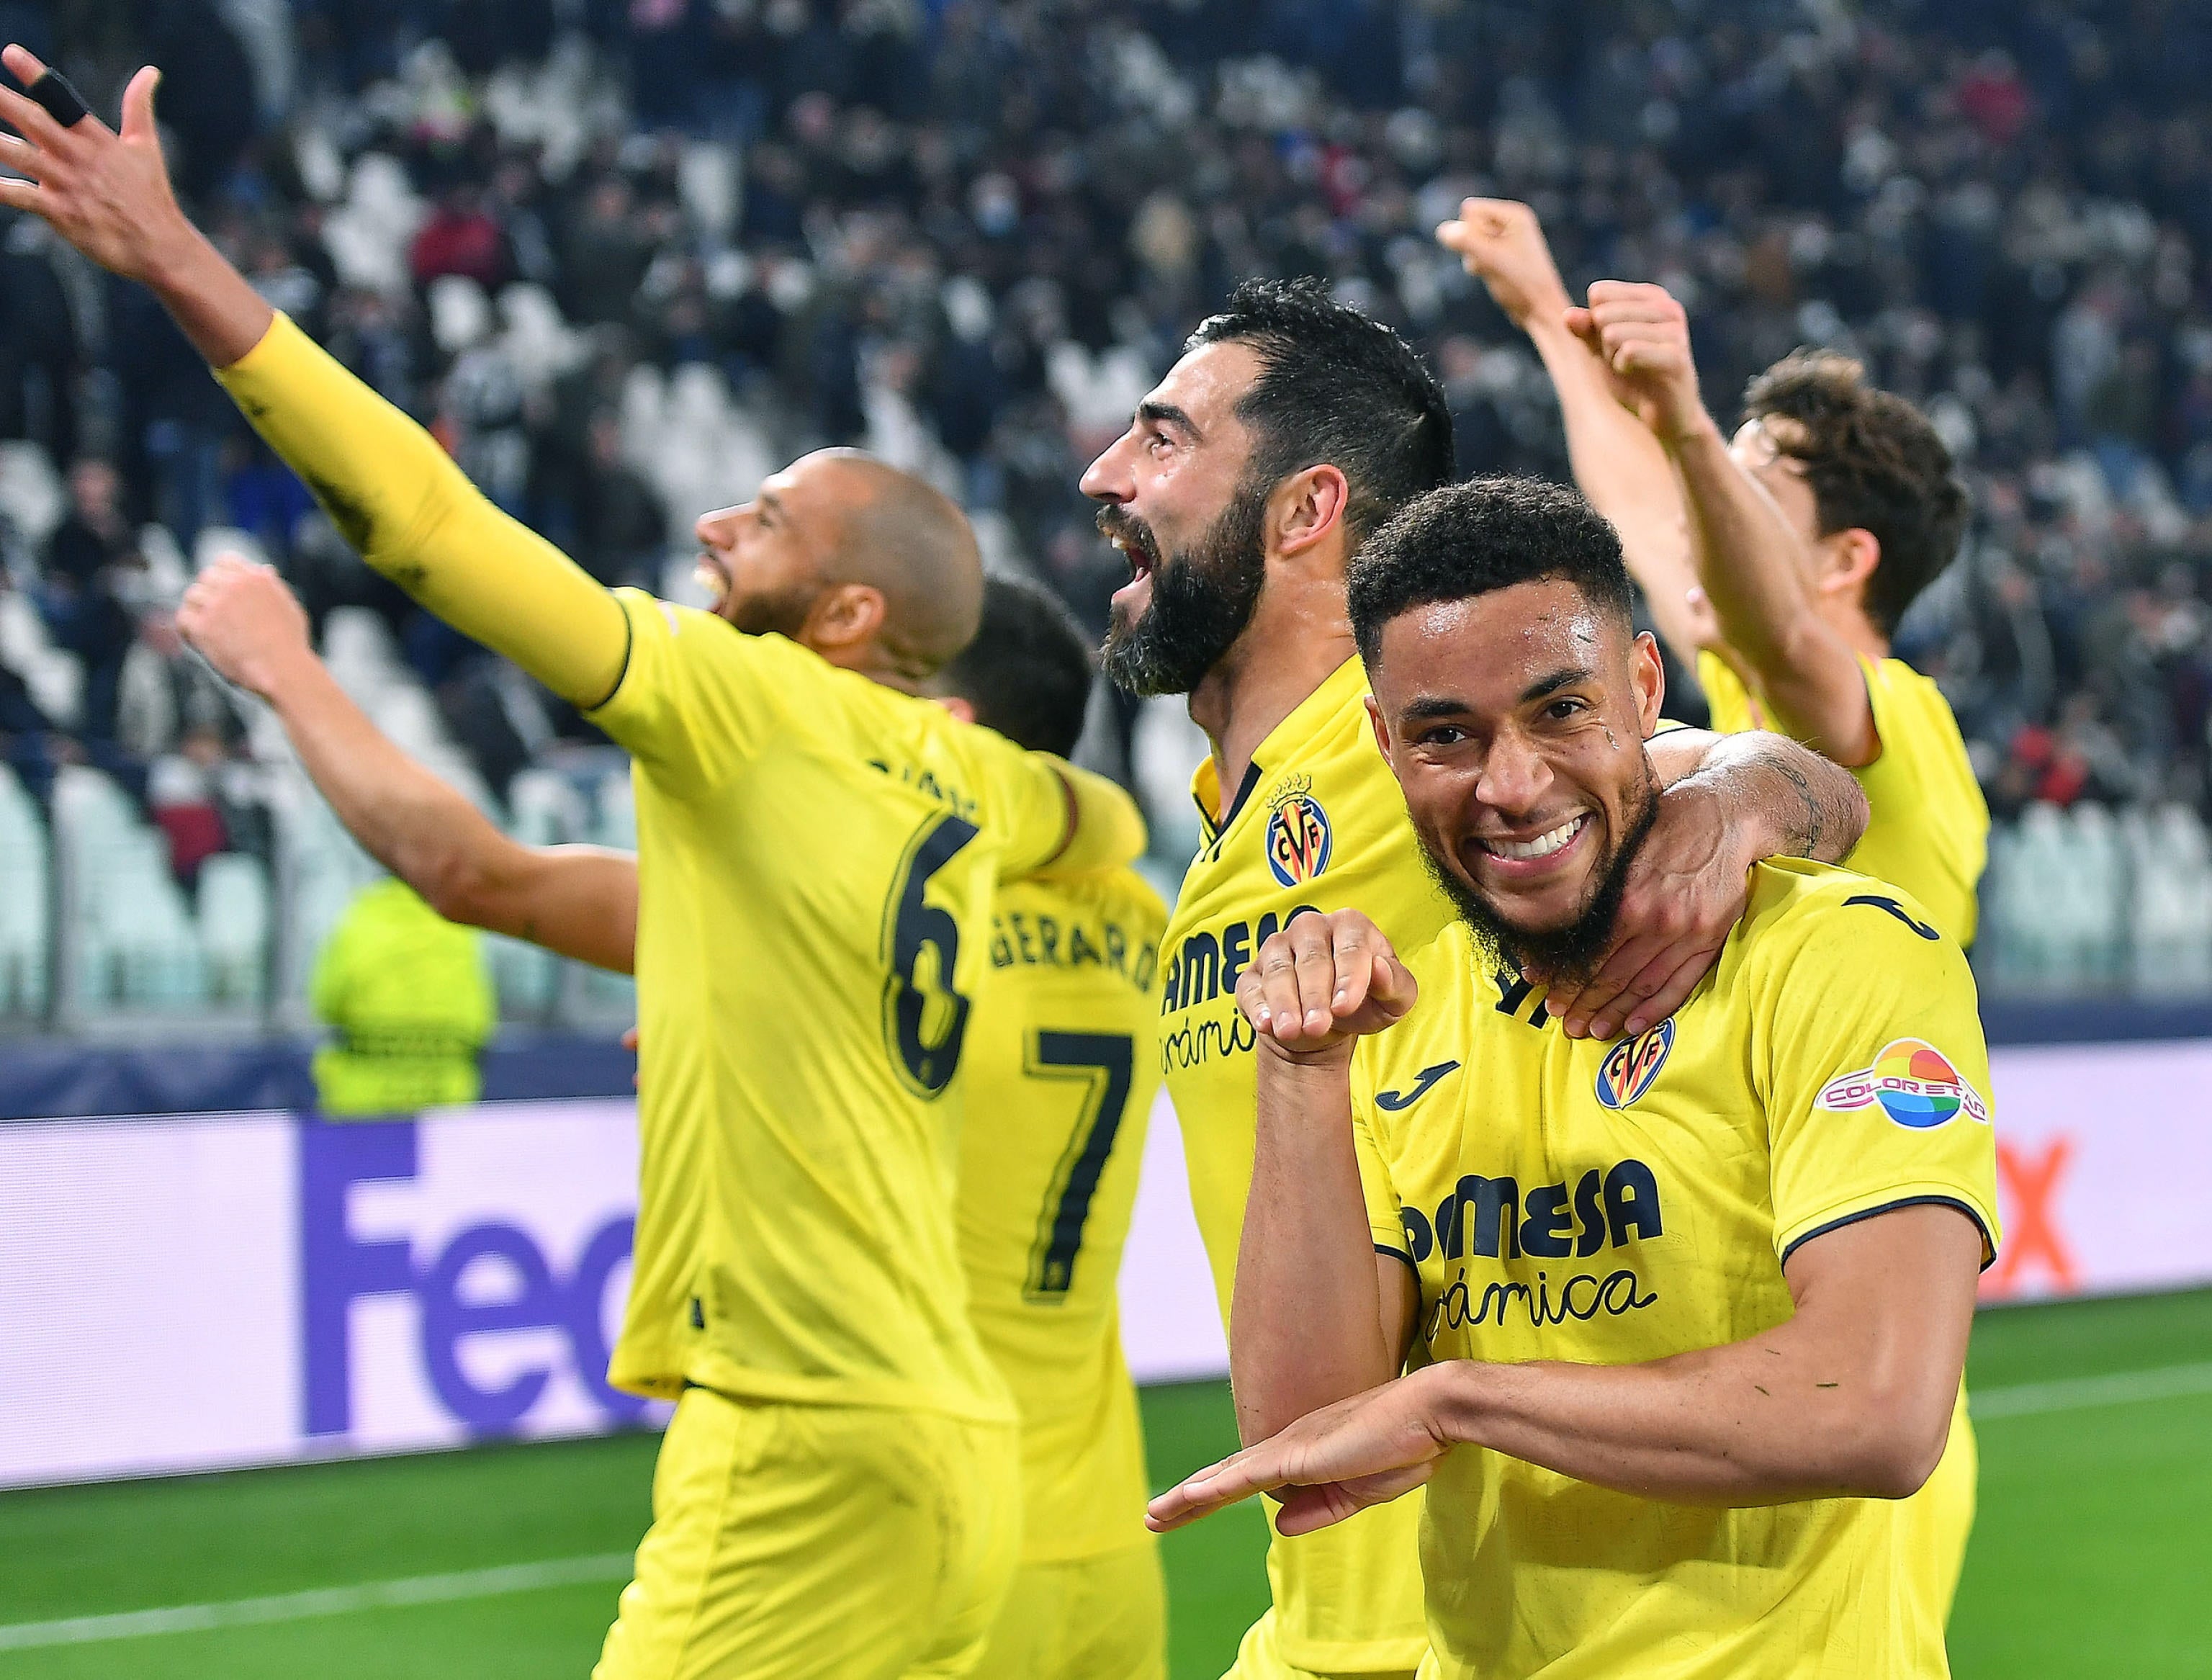 Villarreal celebrate knocking out Juventus in the round of 16